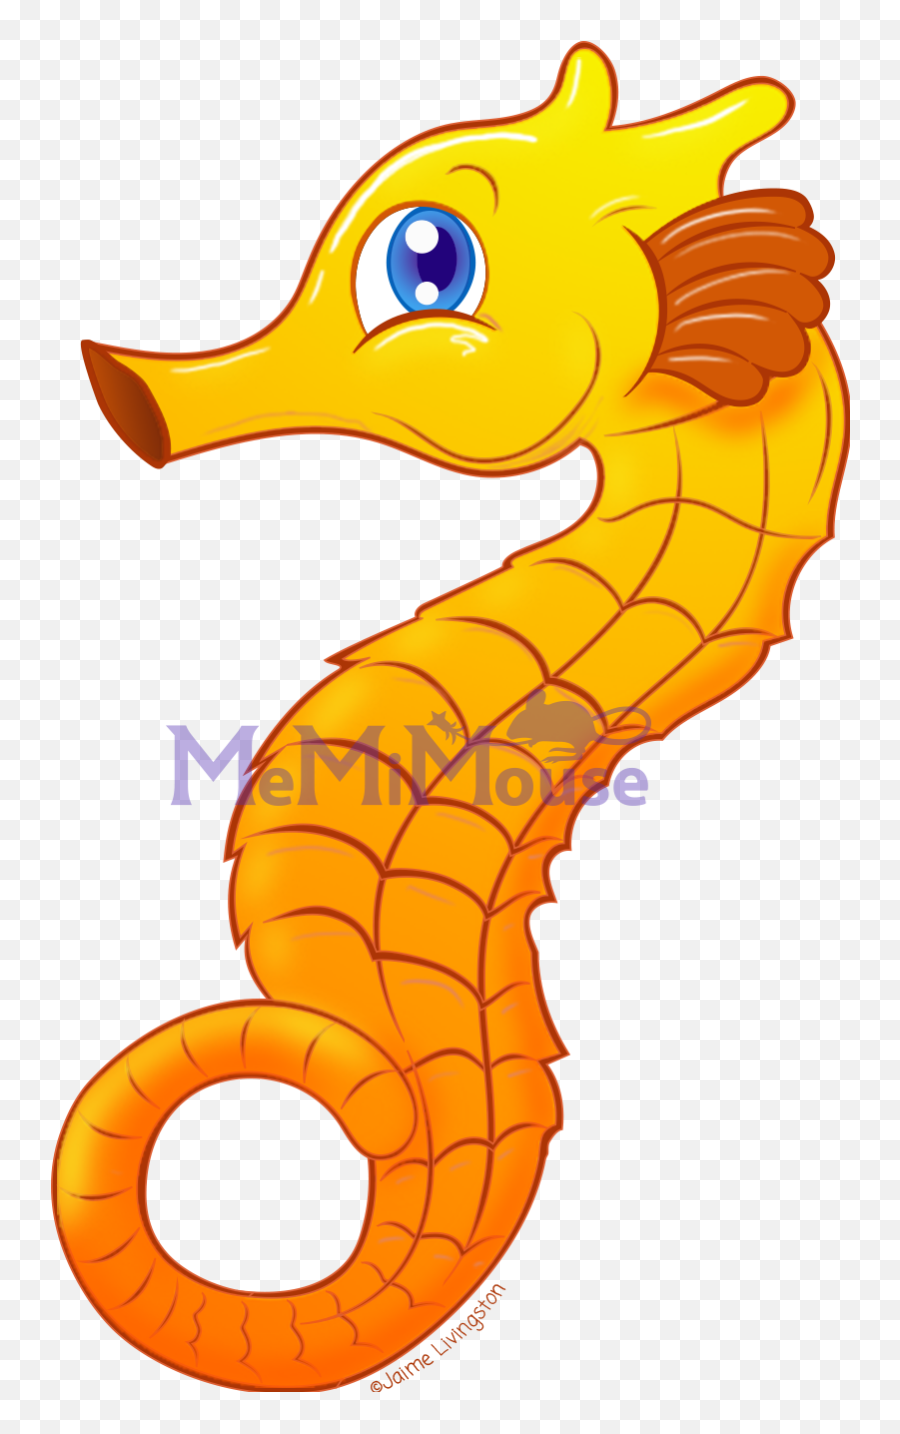 Download Glitz The Seahorse Png Image With No Background - Clip Art,Seahorse Png